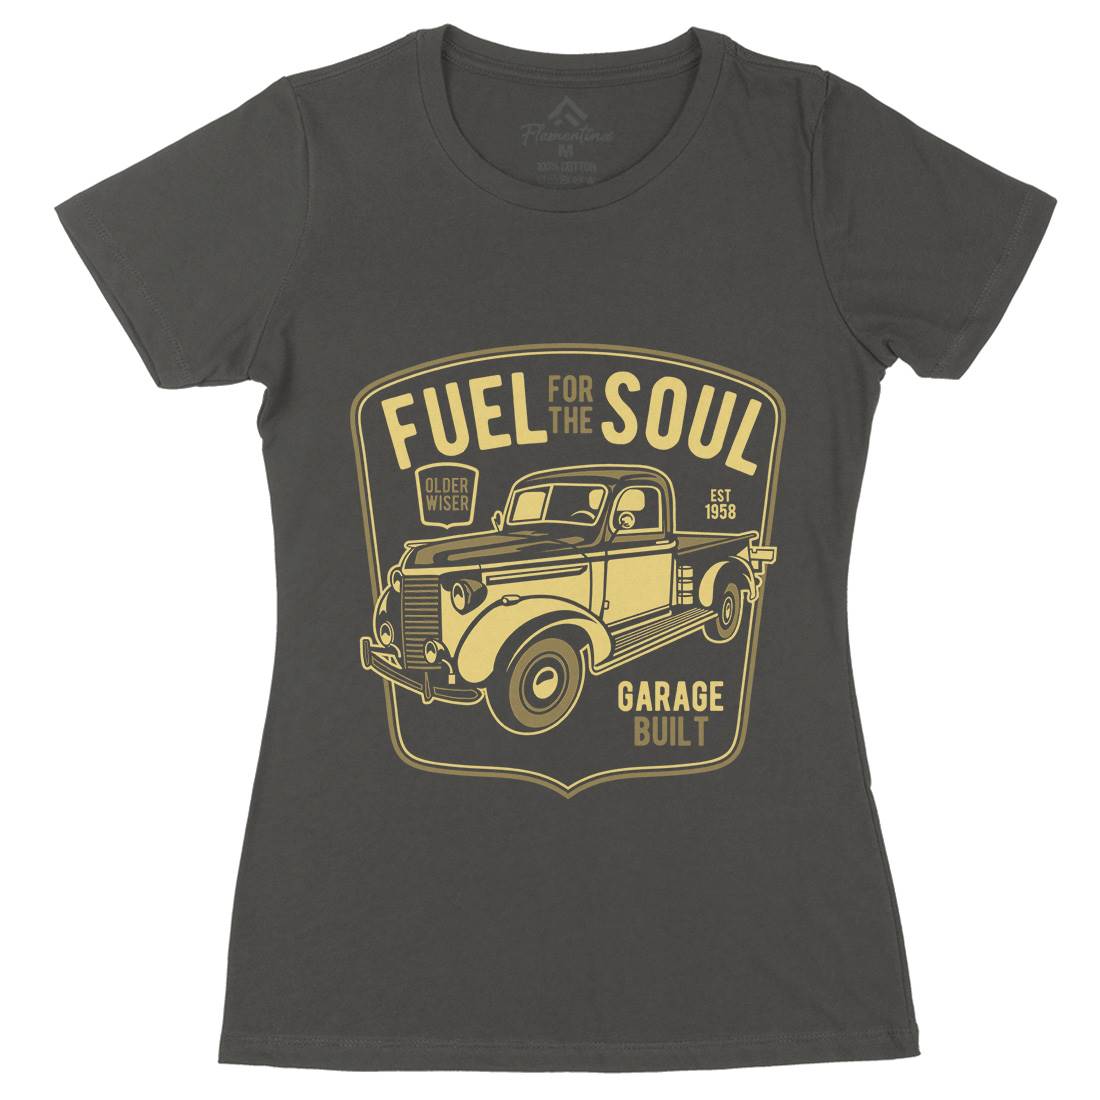 Fuel For The Soul Womens Organic Crew Neck T-Shirt Cars B213